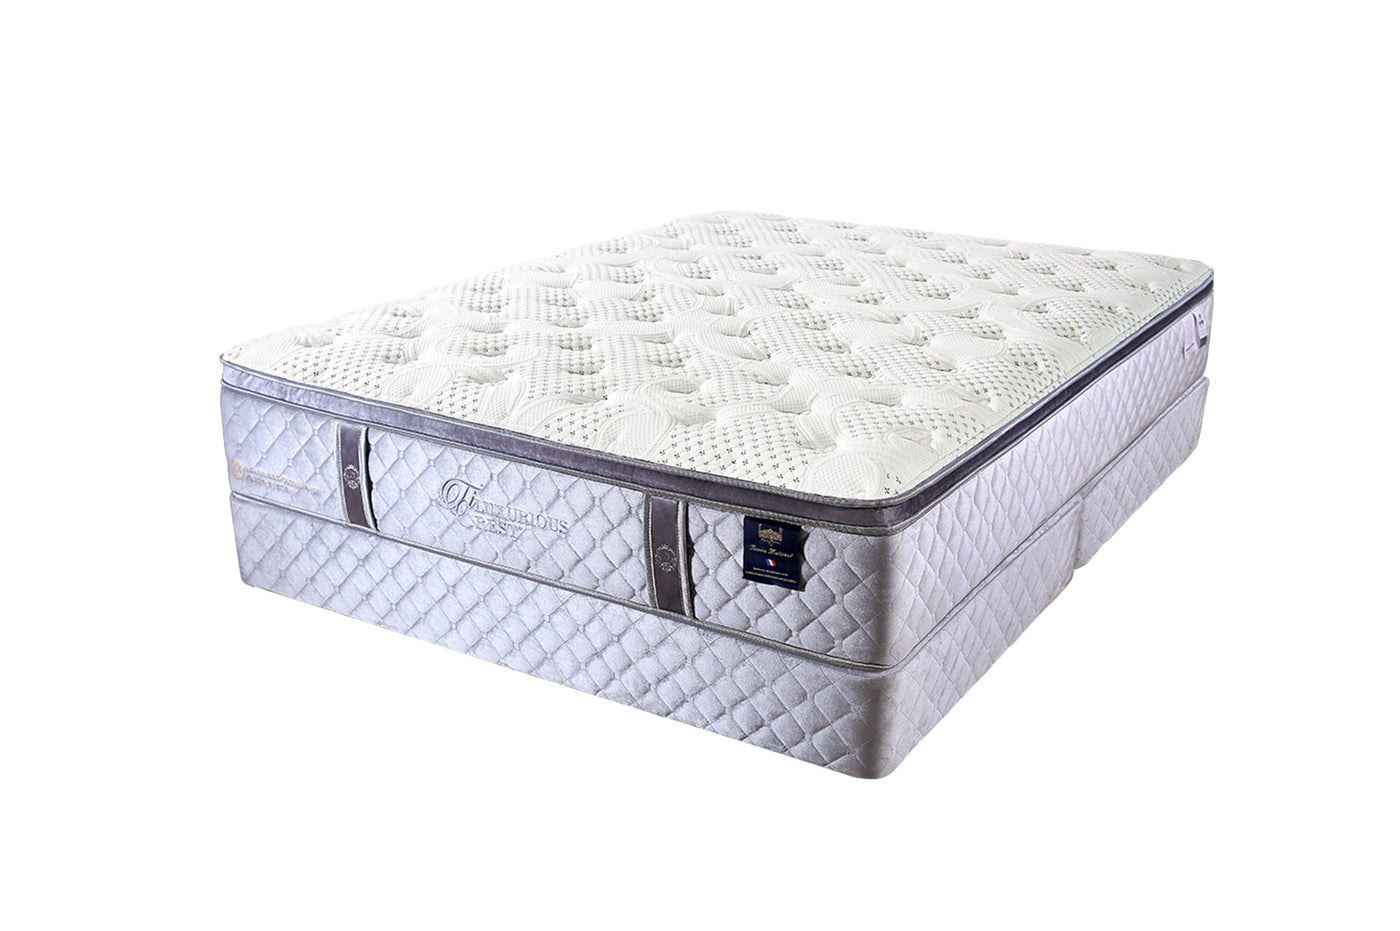 Obi Mattress -Titanium Lux Hoya Casa Hoyacasa.ca couch sofa bed 4 seater sectional table kitchen table love seat sofa bed matress Toronto Canada manufactures home decoration frames indoor Ottoman sale